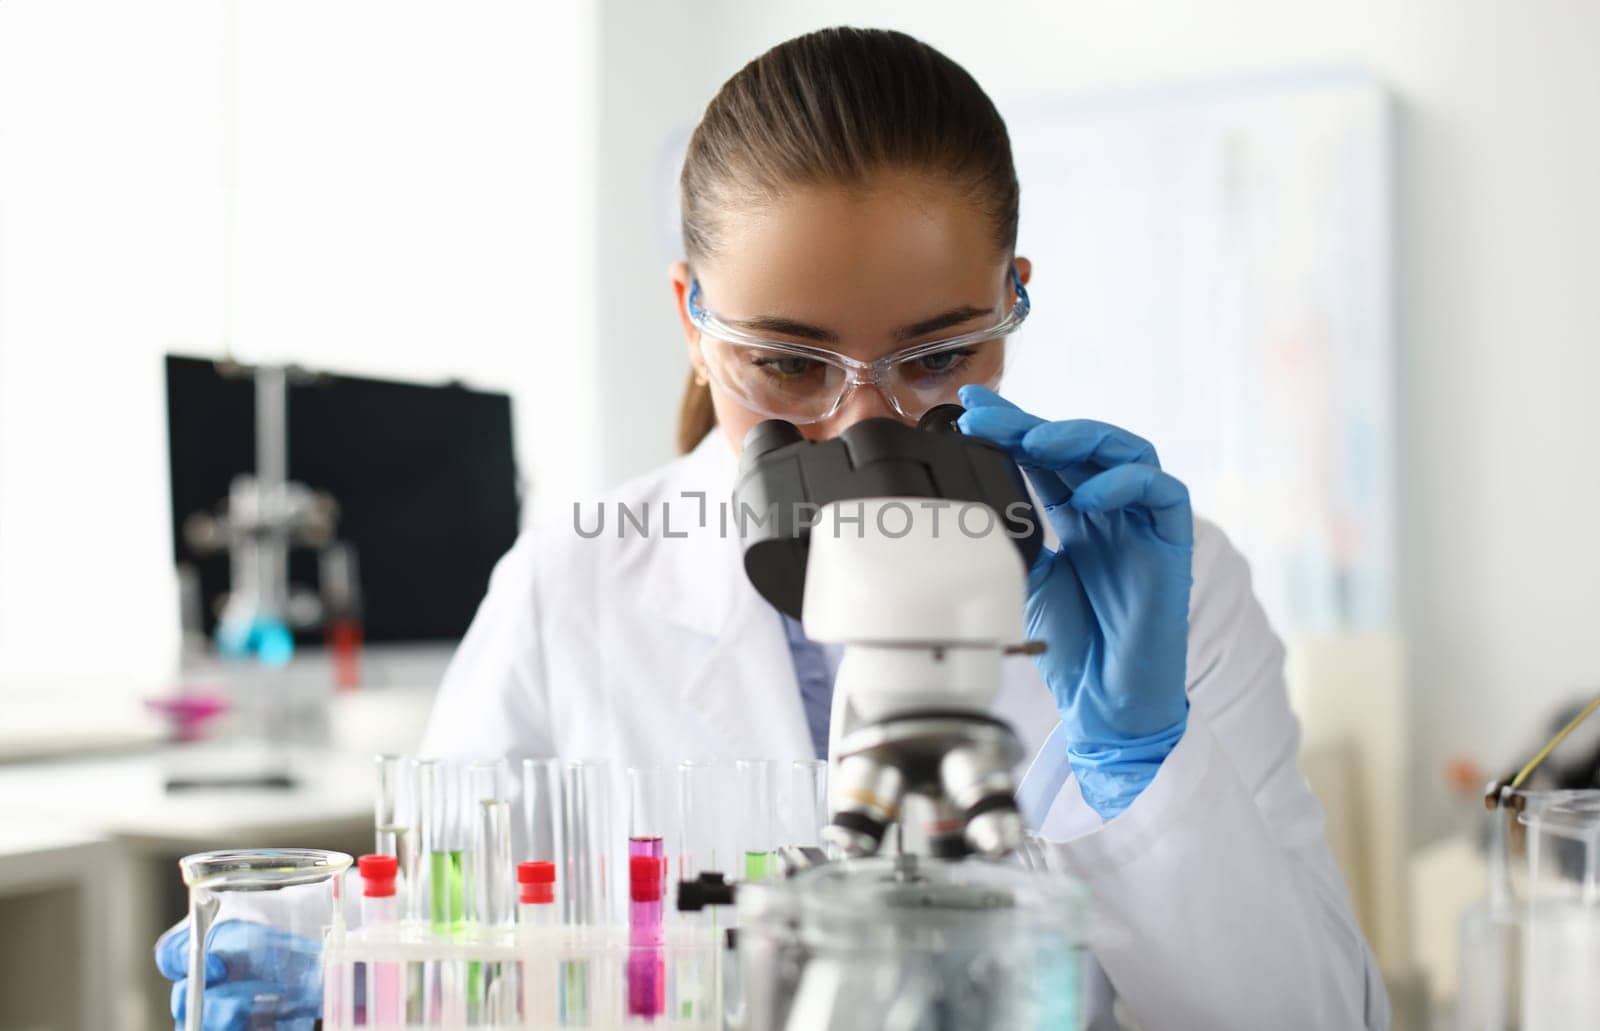 Portrait of scientist examining sample under microscope. Experienced lab assistant using special equipments. Laboratory interior on background. Chemical experiments concept